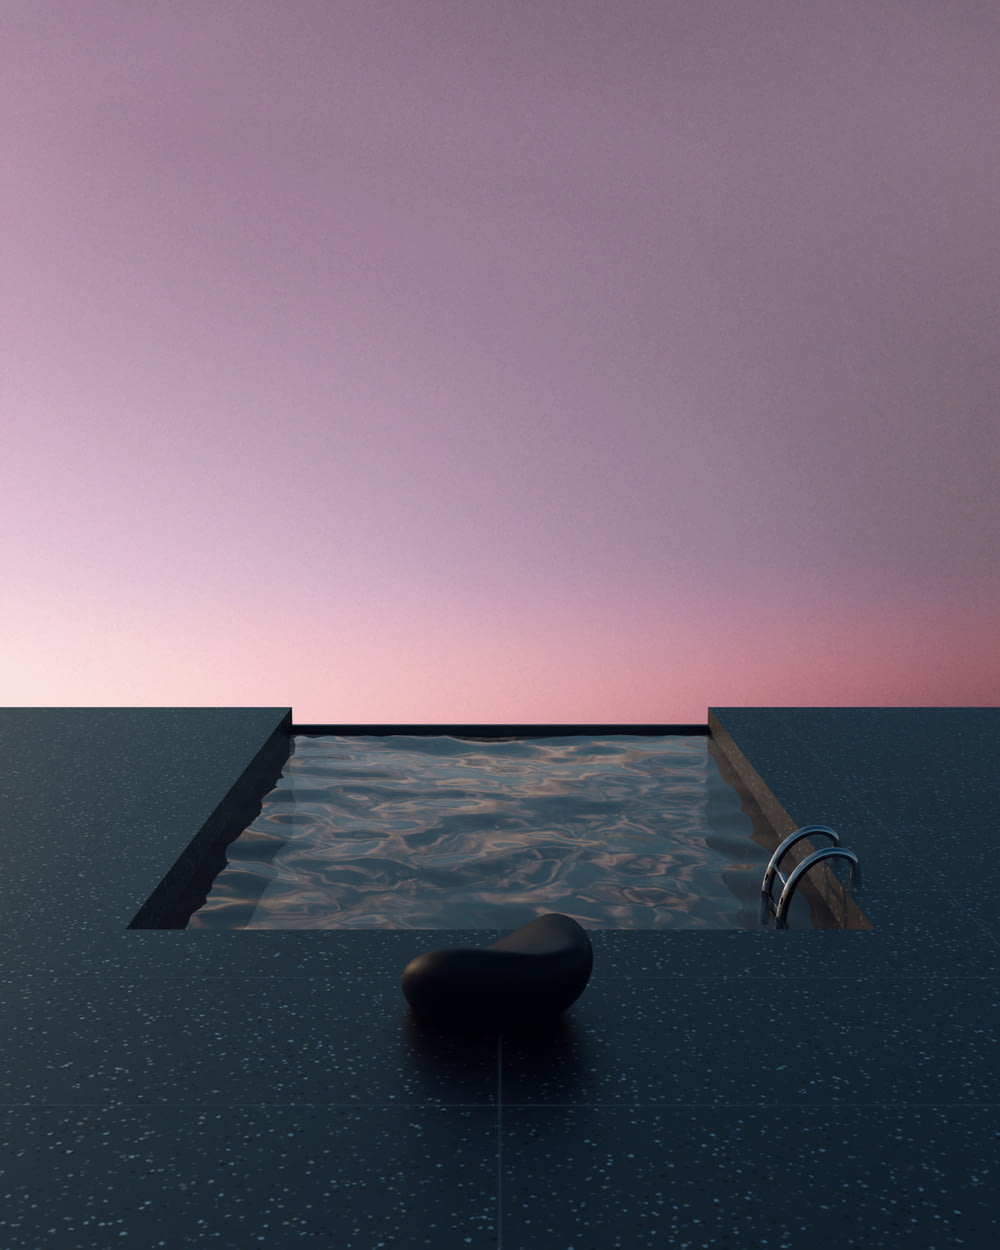 a black object floating in a pool of water